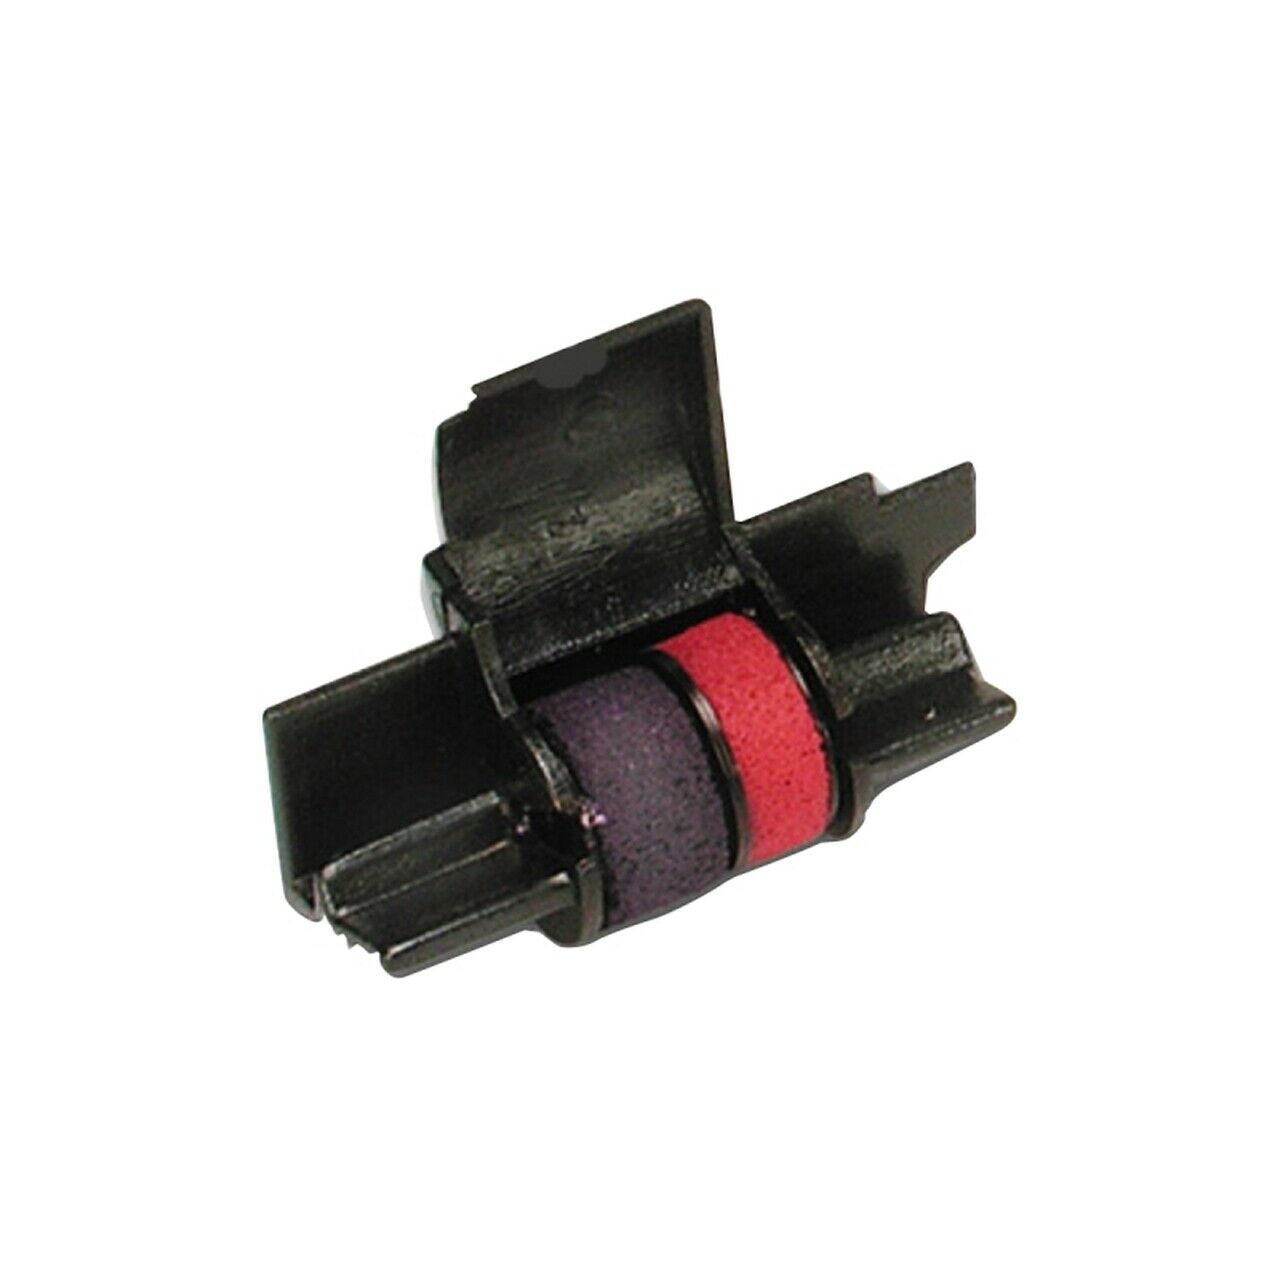 Compatible/Replacement Calculator Ink Roller, Black/Red IR-40T, for Casio HR-100 - $3.47